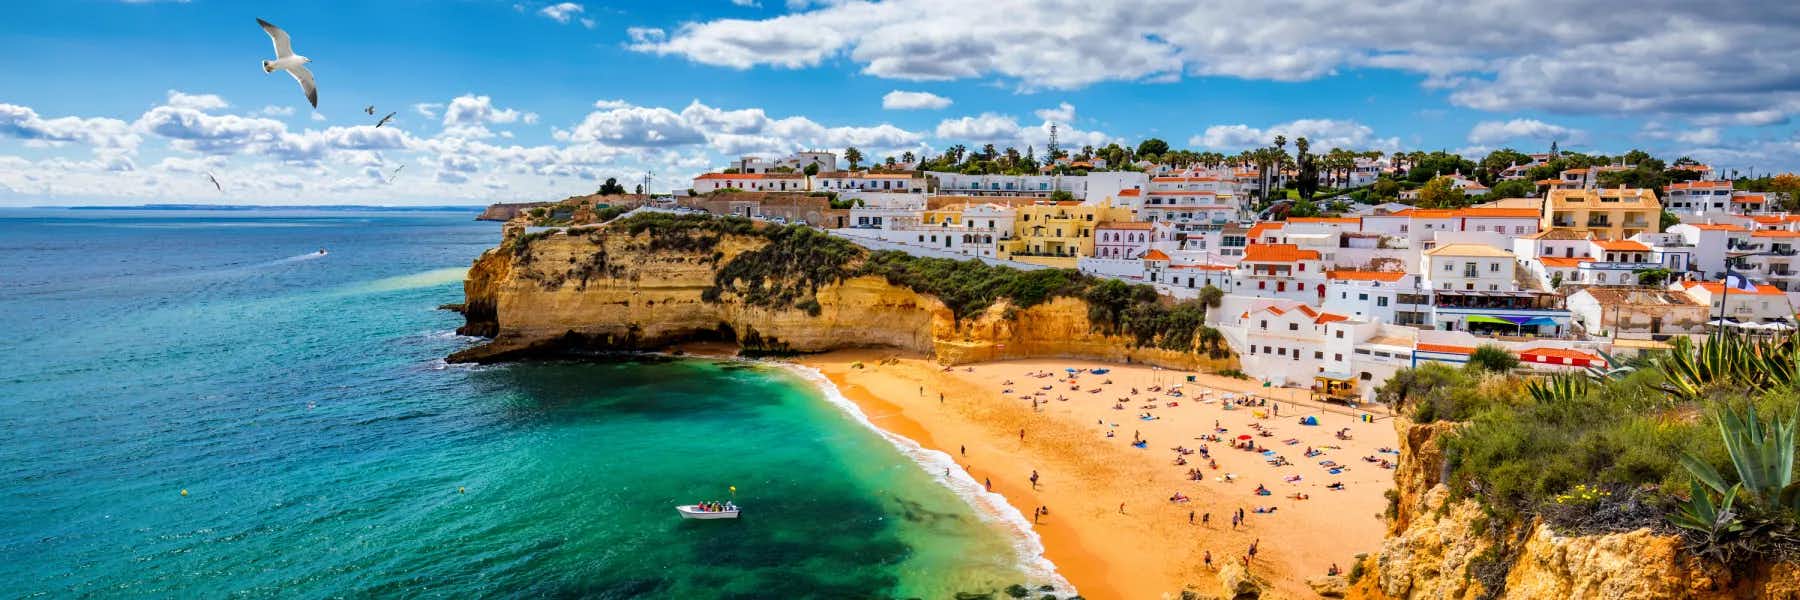 Cost of Living in Portugal